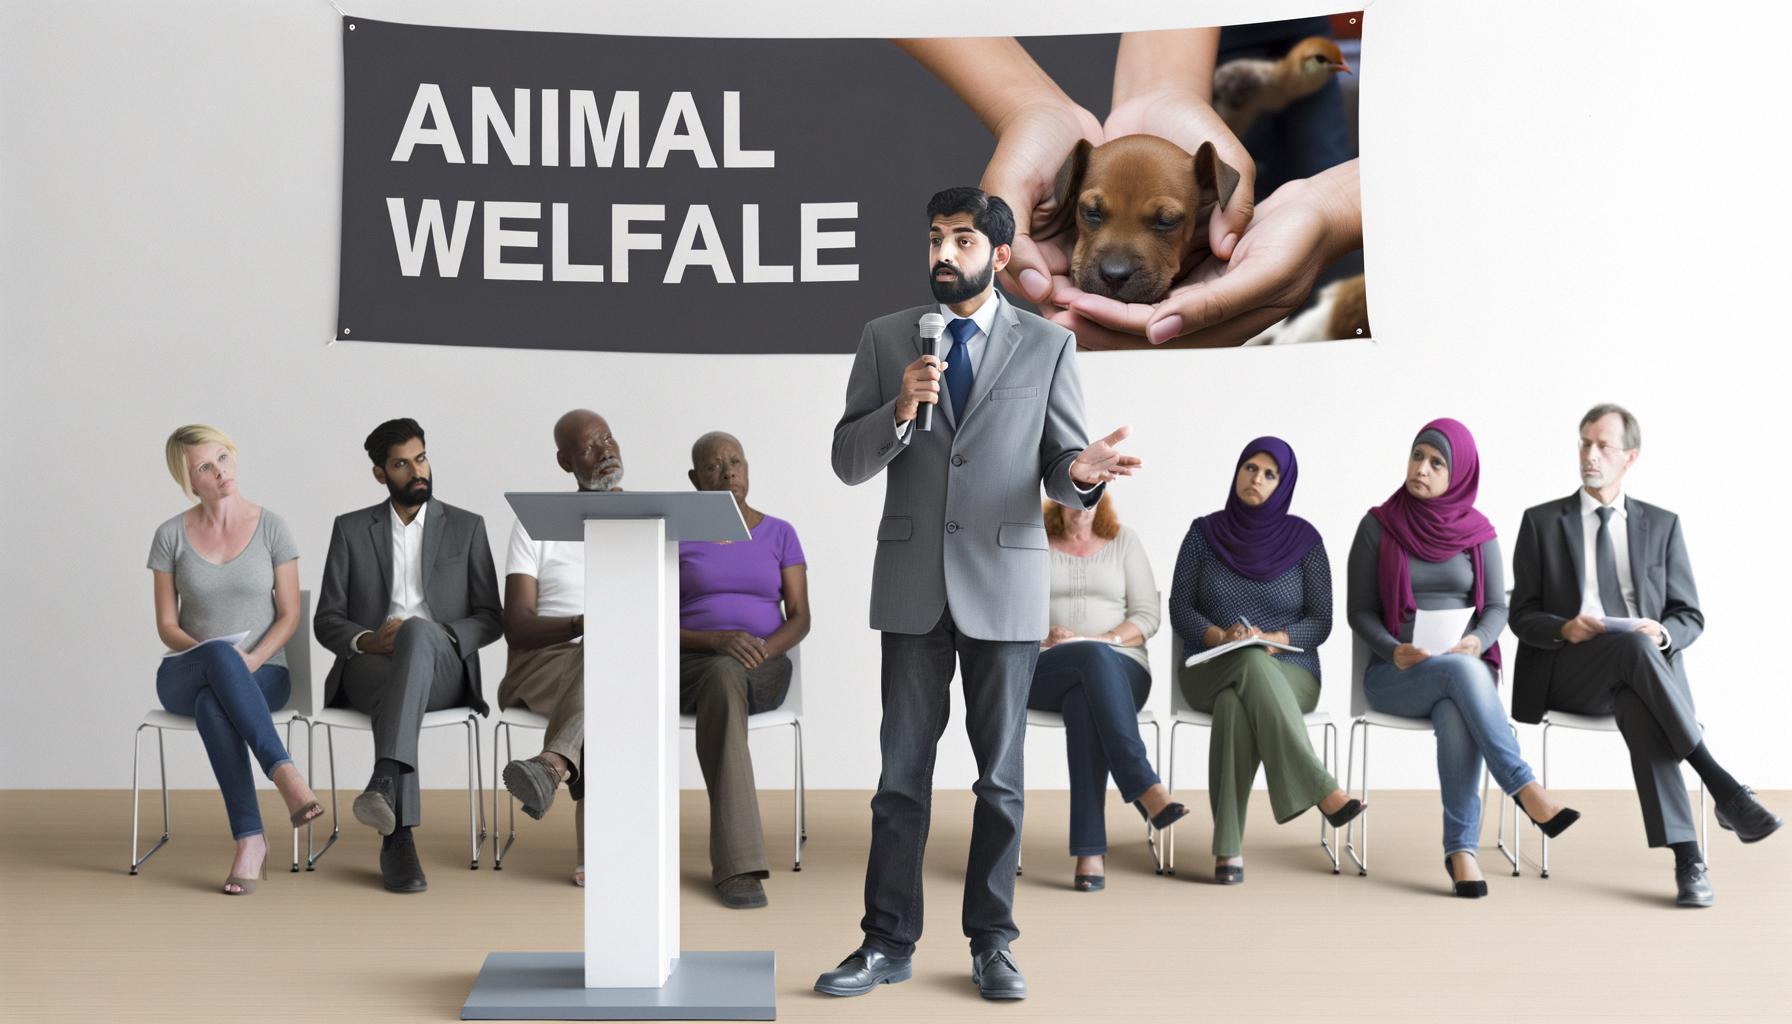 Animal welfare emerging as significant social and political issue